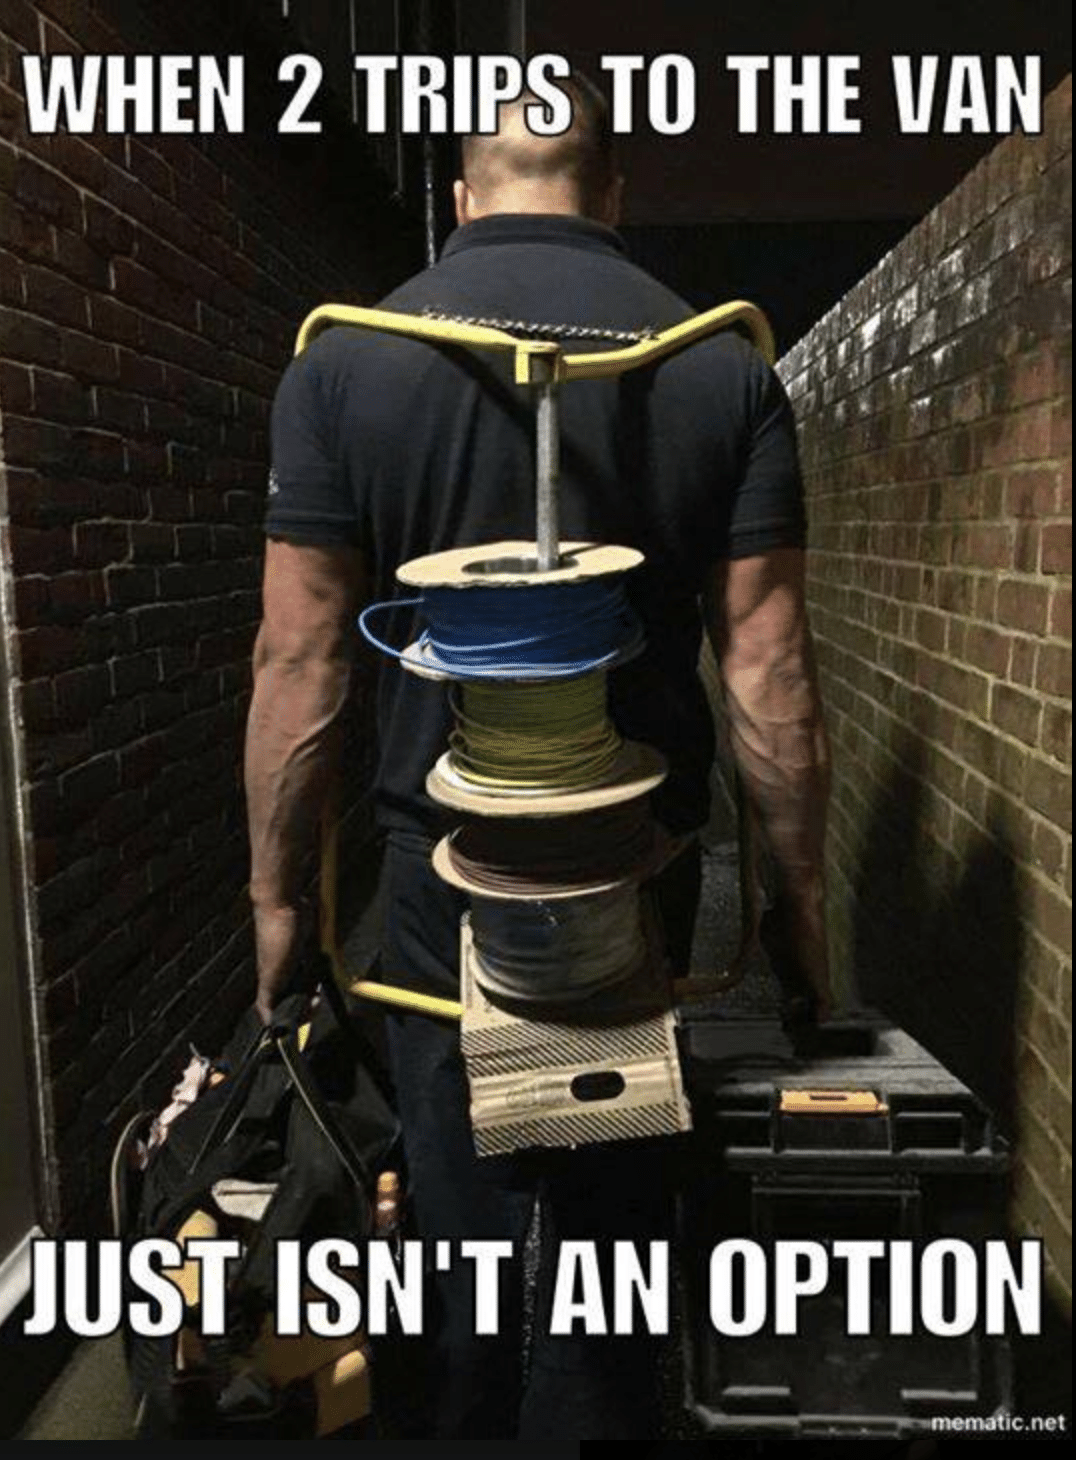 Electrician Meme: When 2 trips to the van just isn't an option